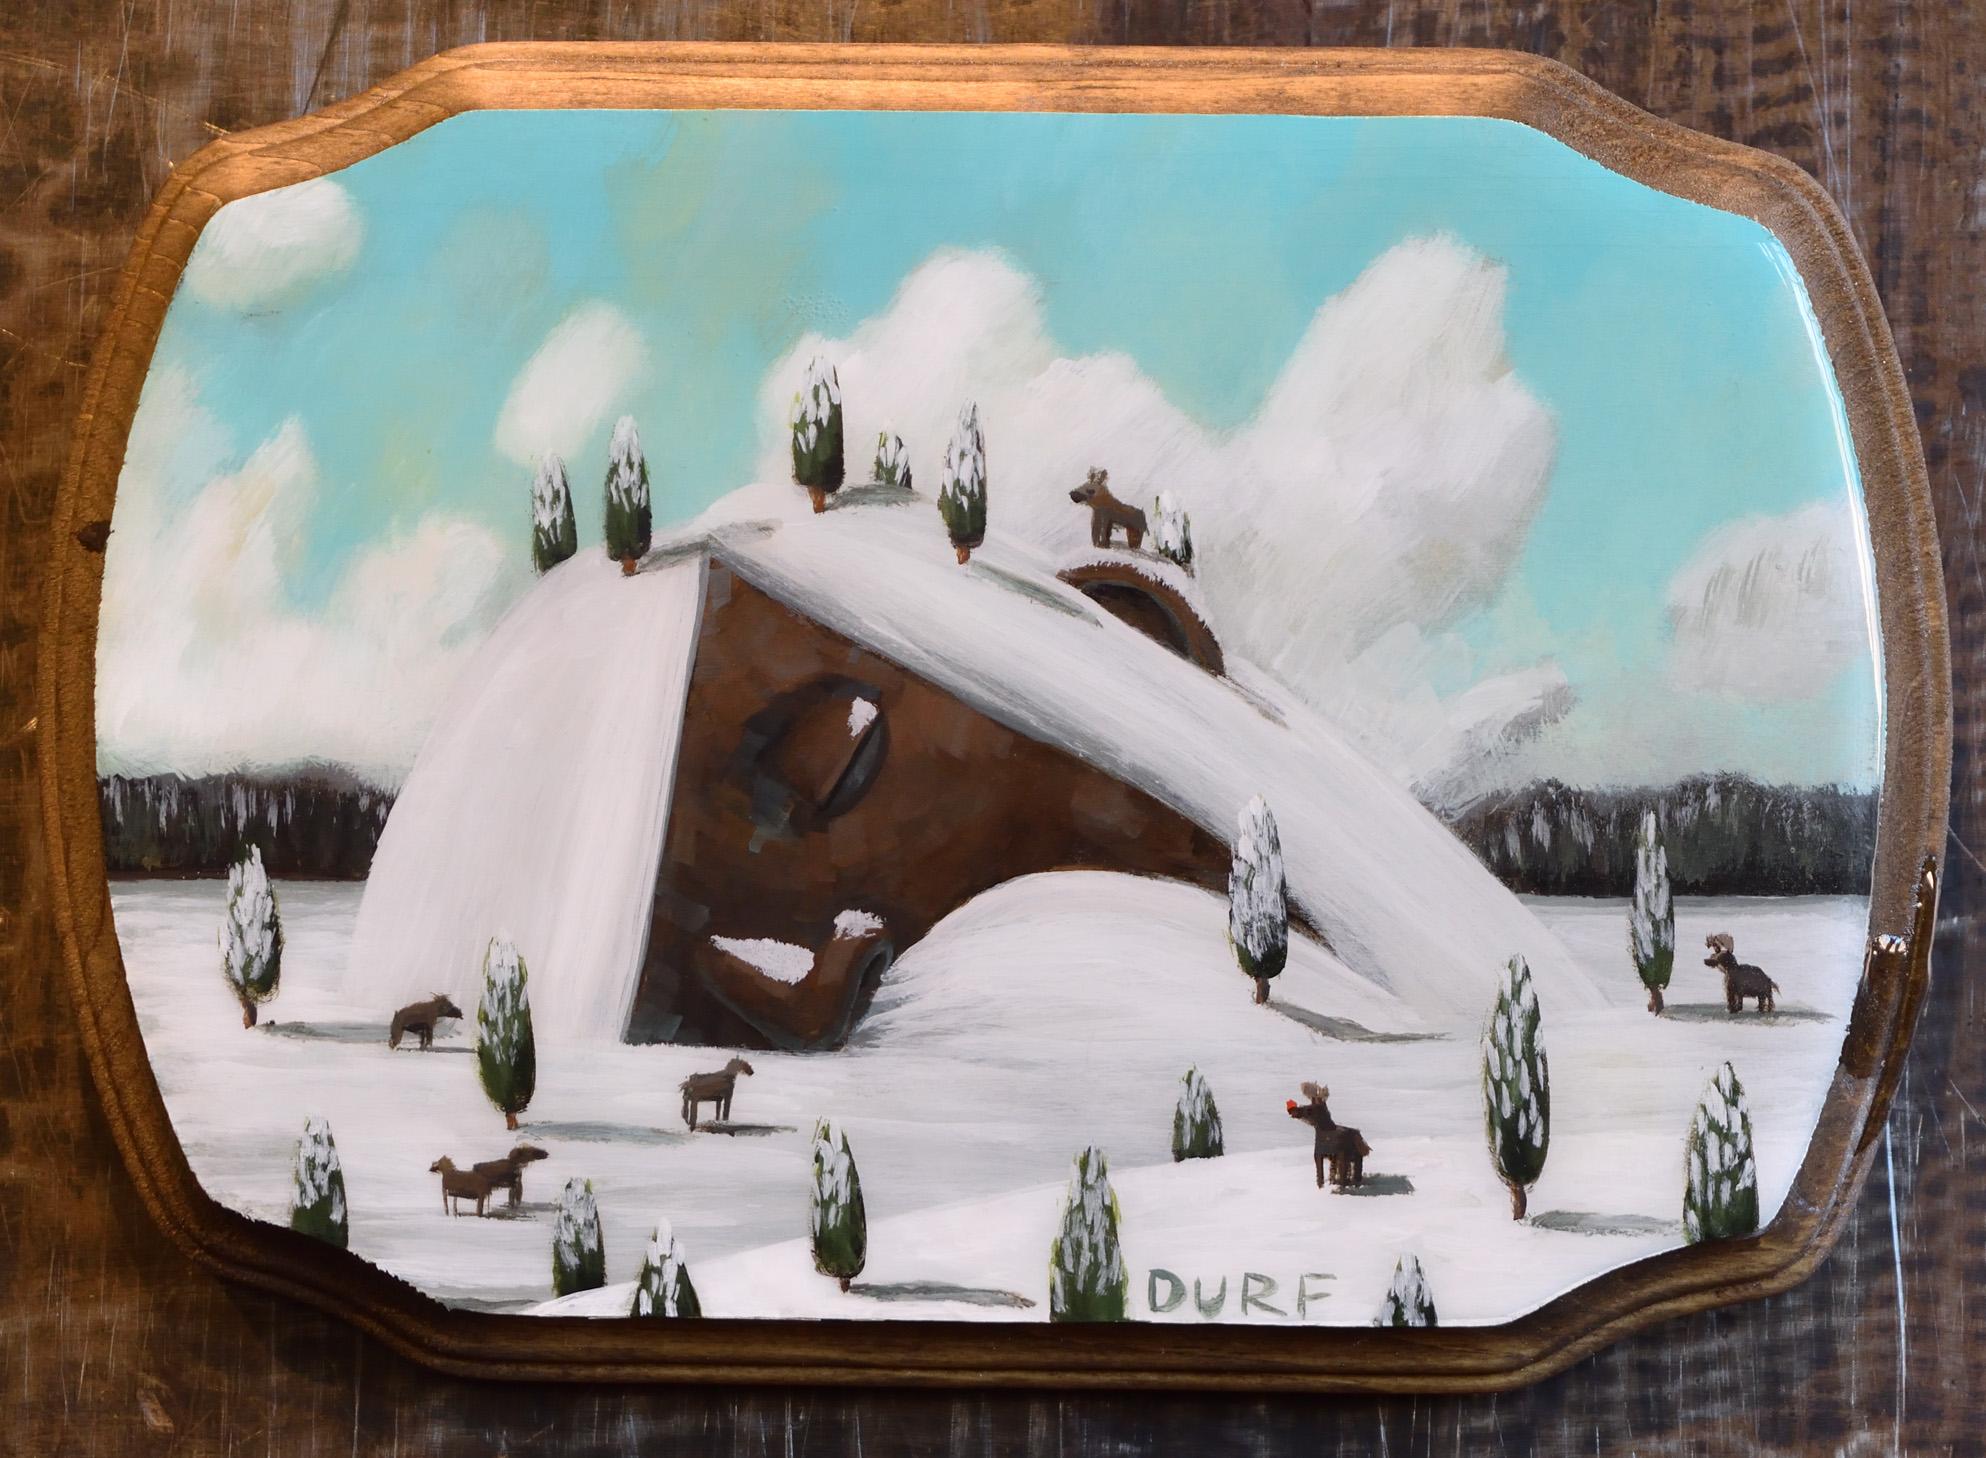 Nathan Durfee Figurative Painting - "Slumbering by the Wildlife" Mixed Media painting